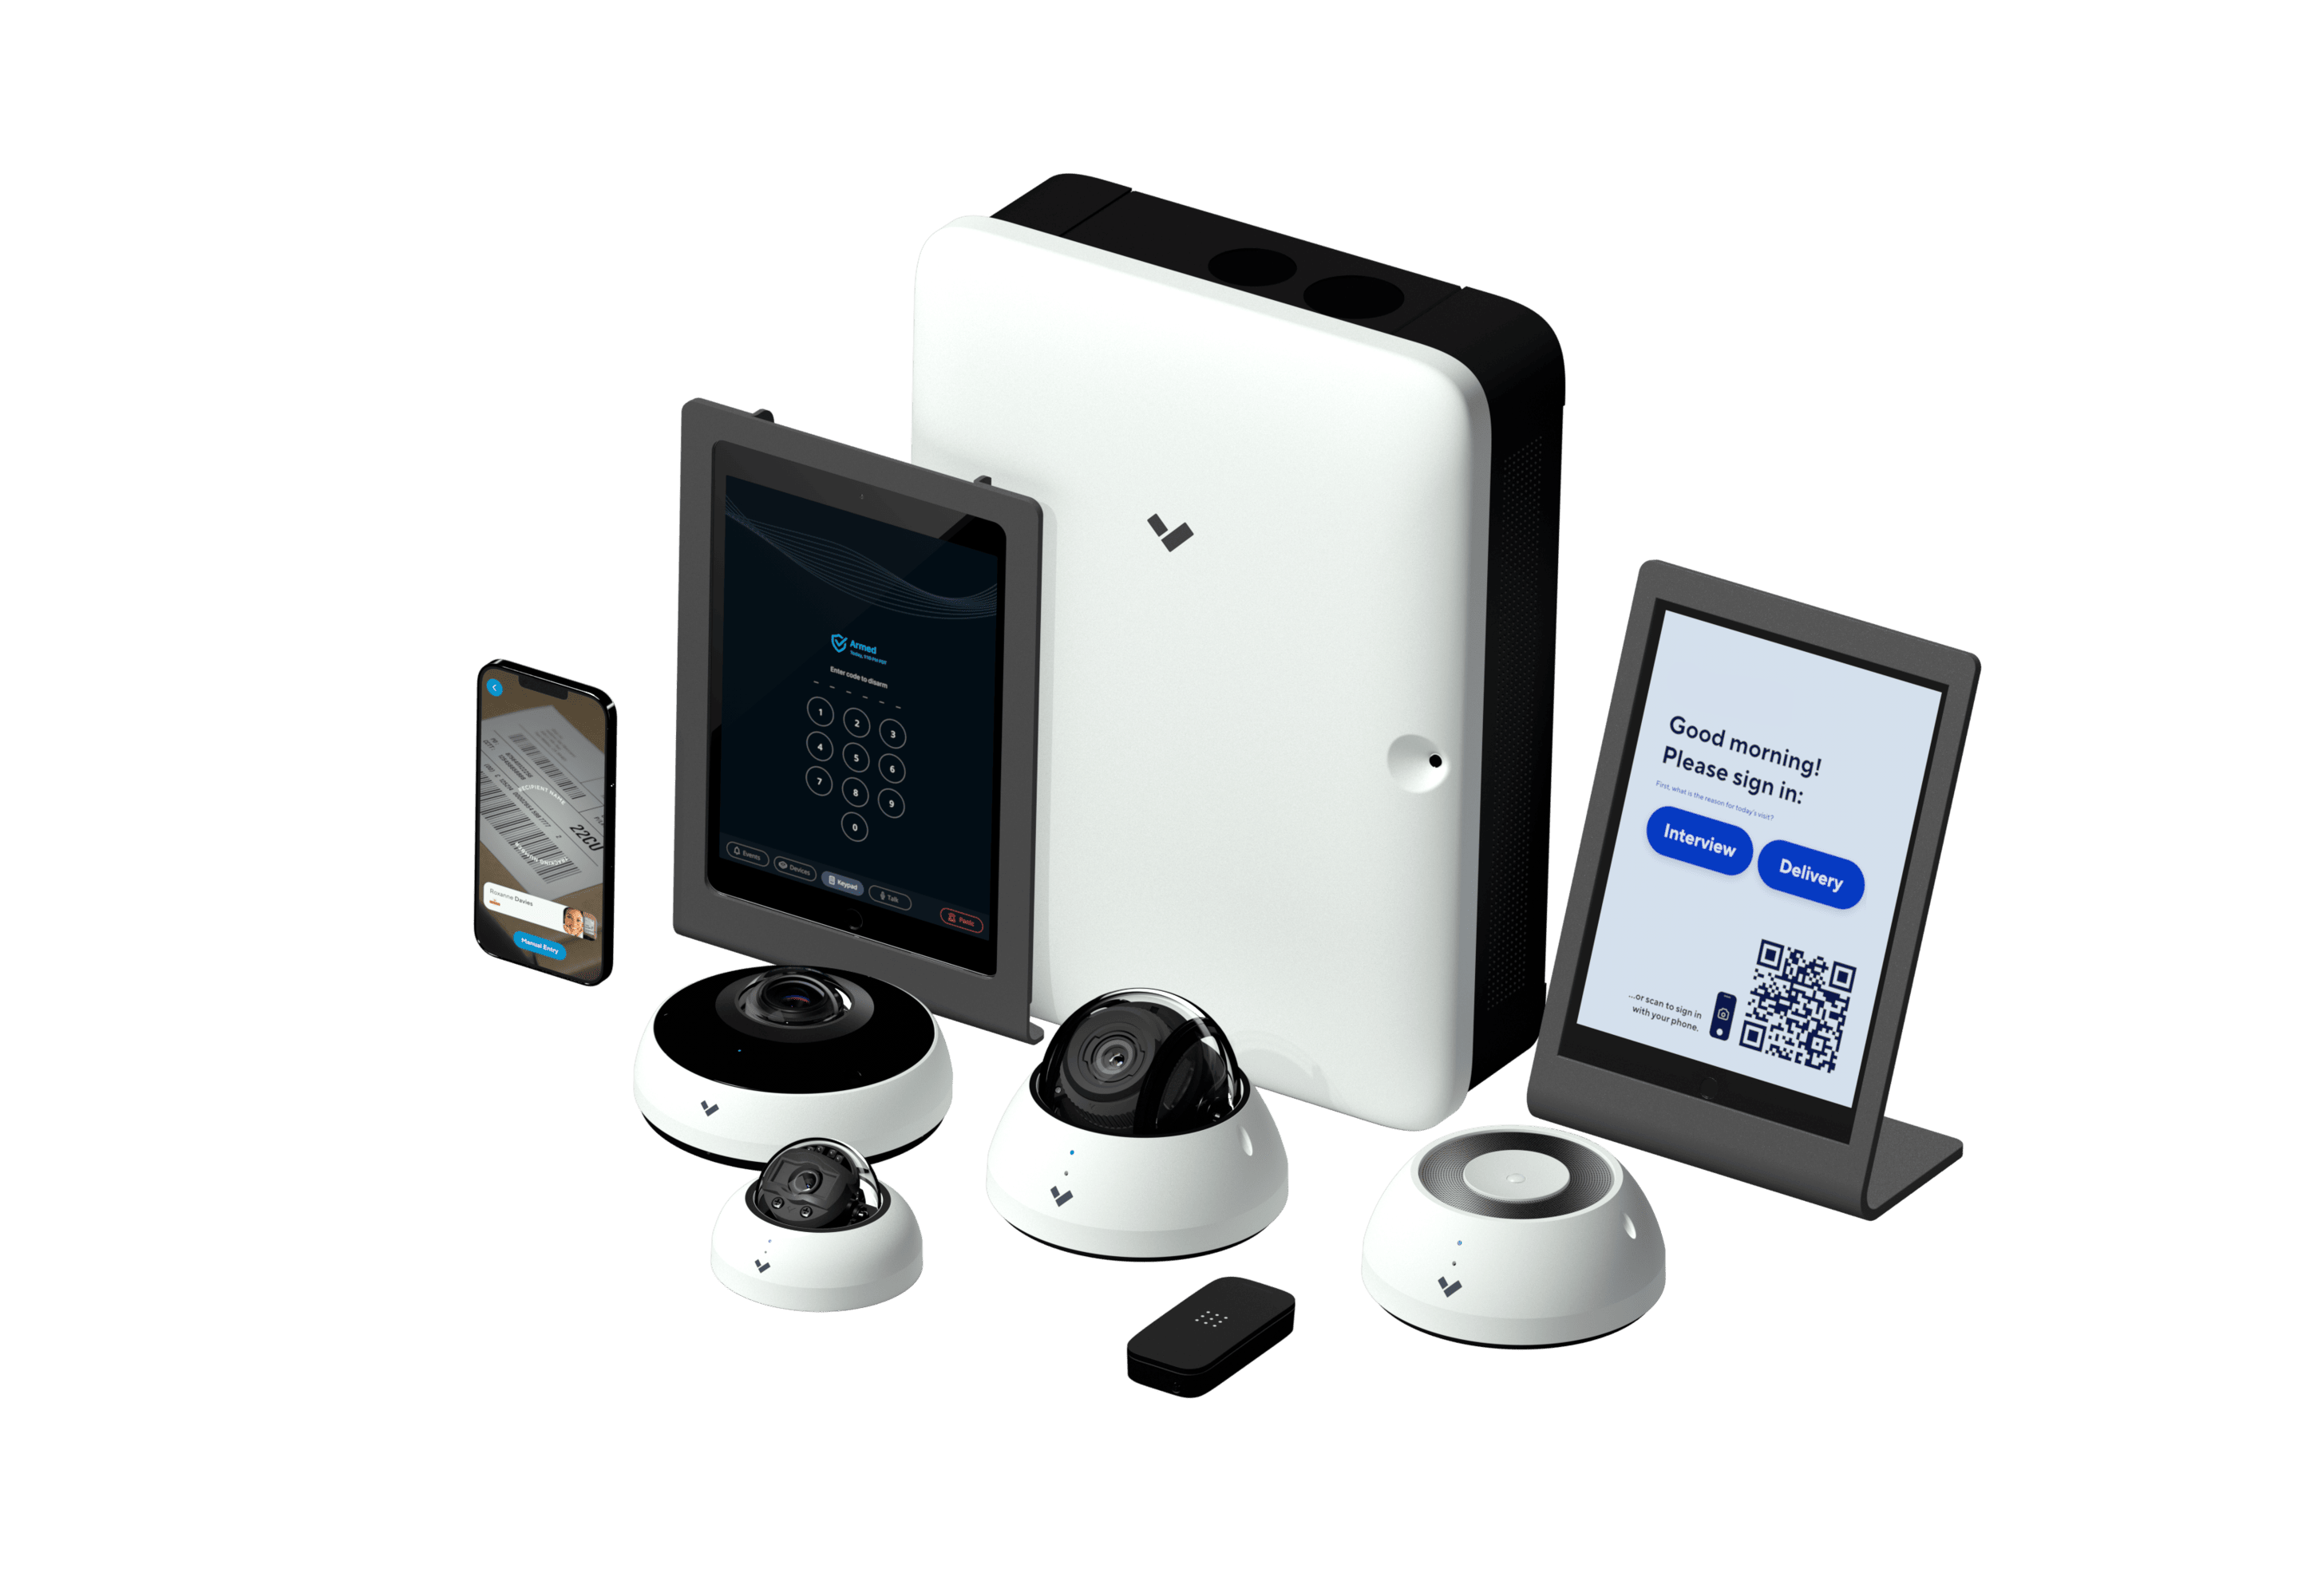 Verkada family of restaurant security cameras and devices